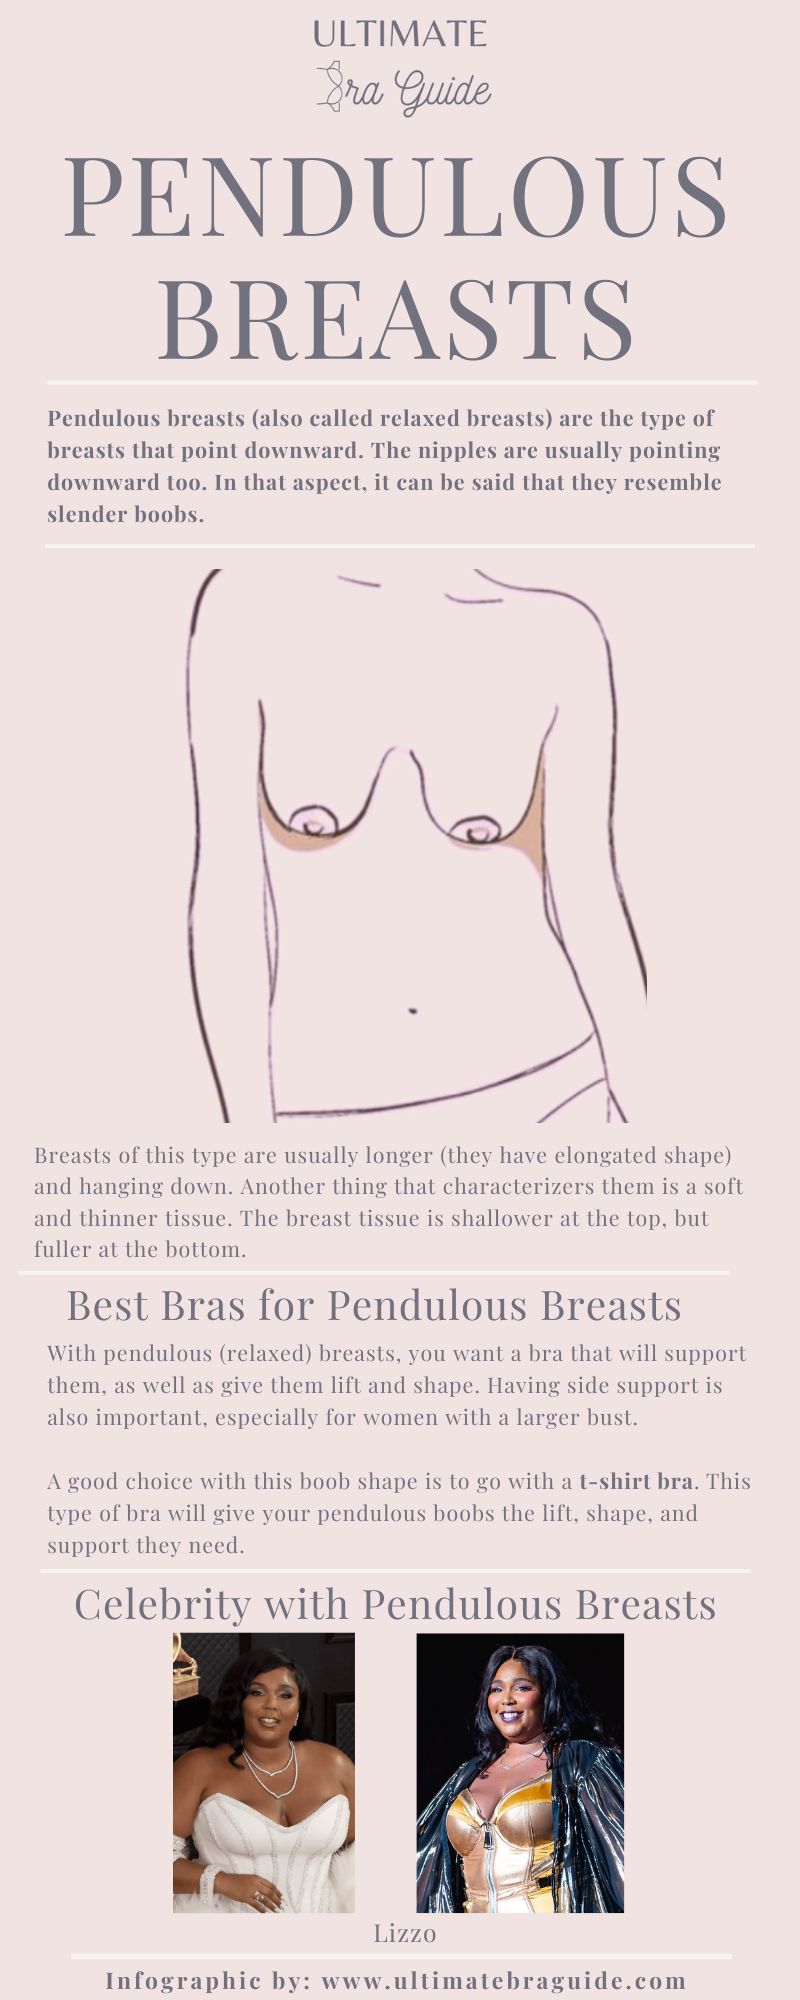 An infographic about pendulous breasts - what they are, what they look like, what are the best bras for them, and some celebrities with pendulous boobs